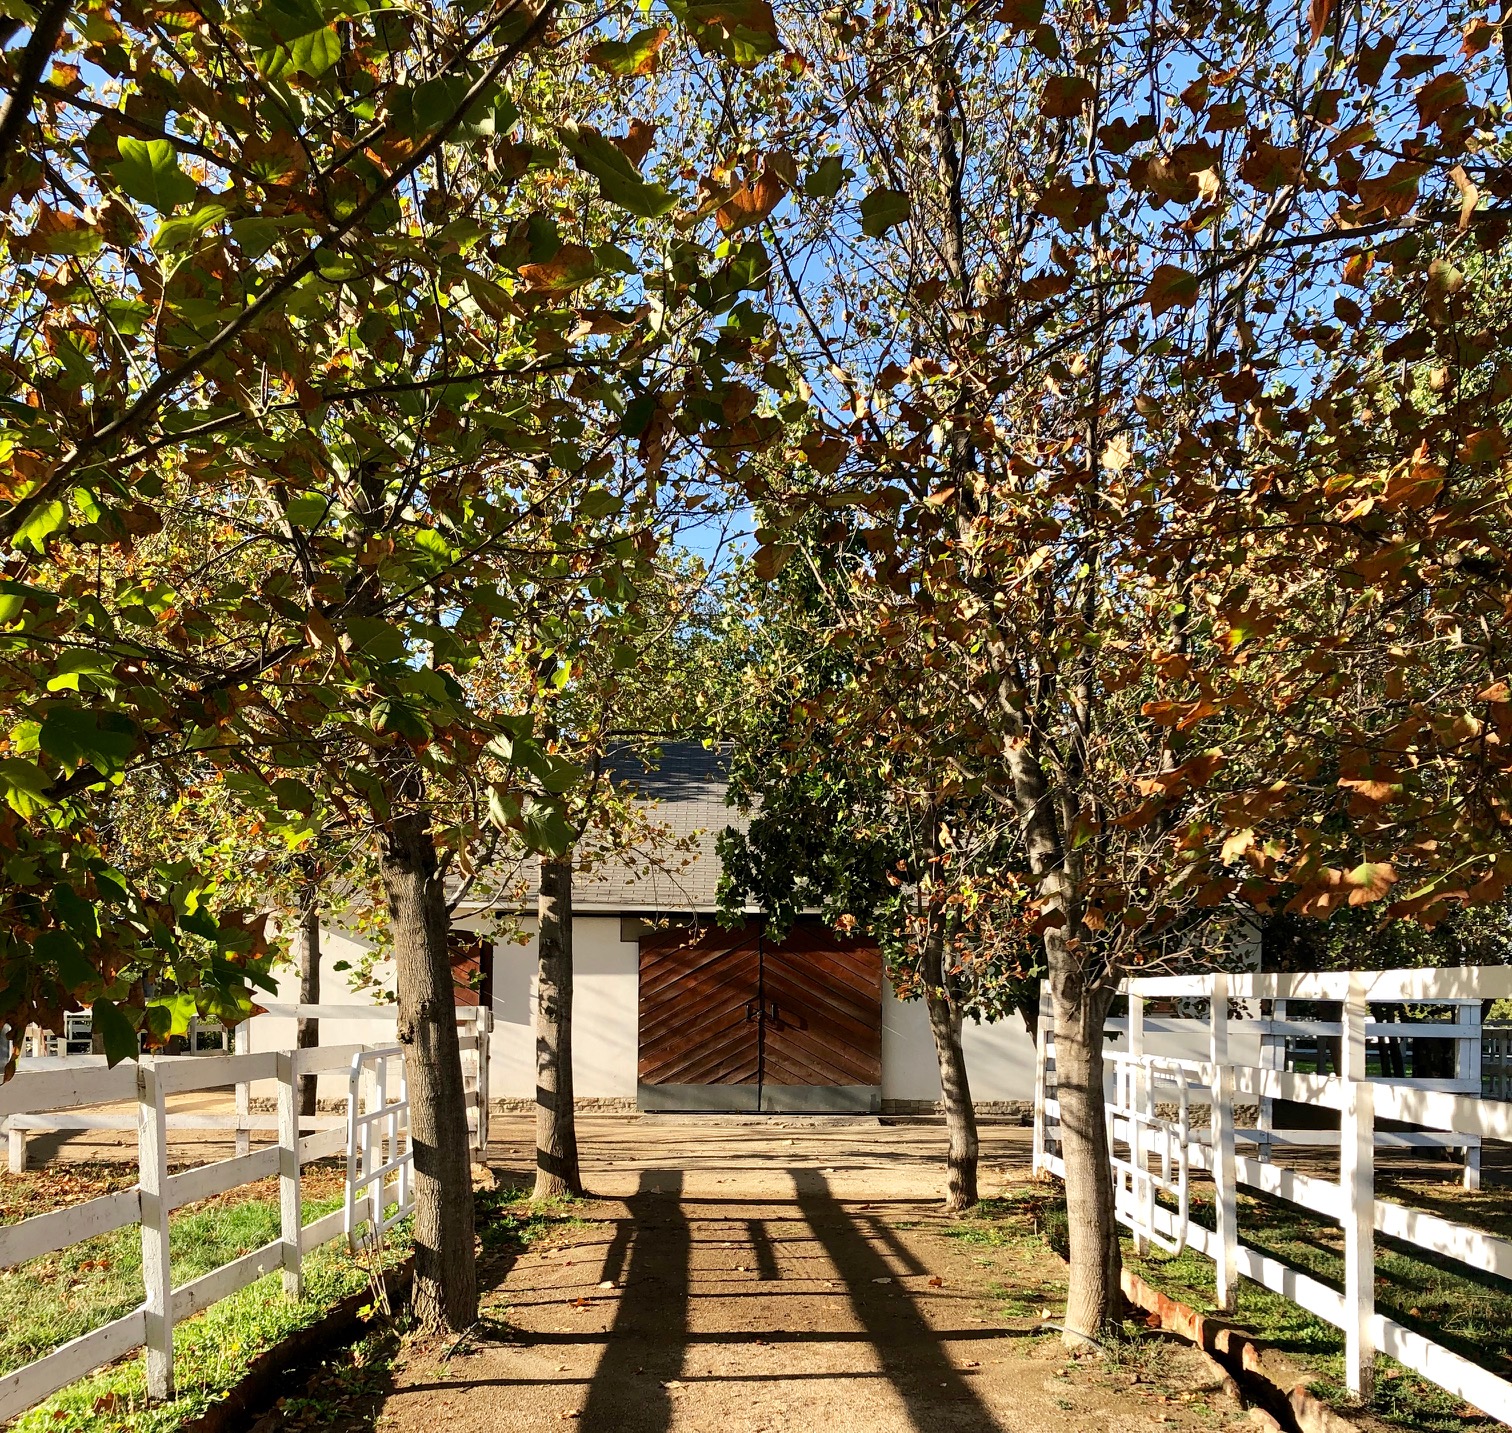 California Chrome’s barn in Chile: “You could live in his stable,” says Oussama Aboughazale. Photo: Amanda Duckworth